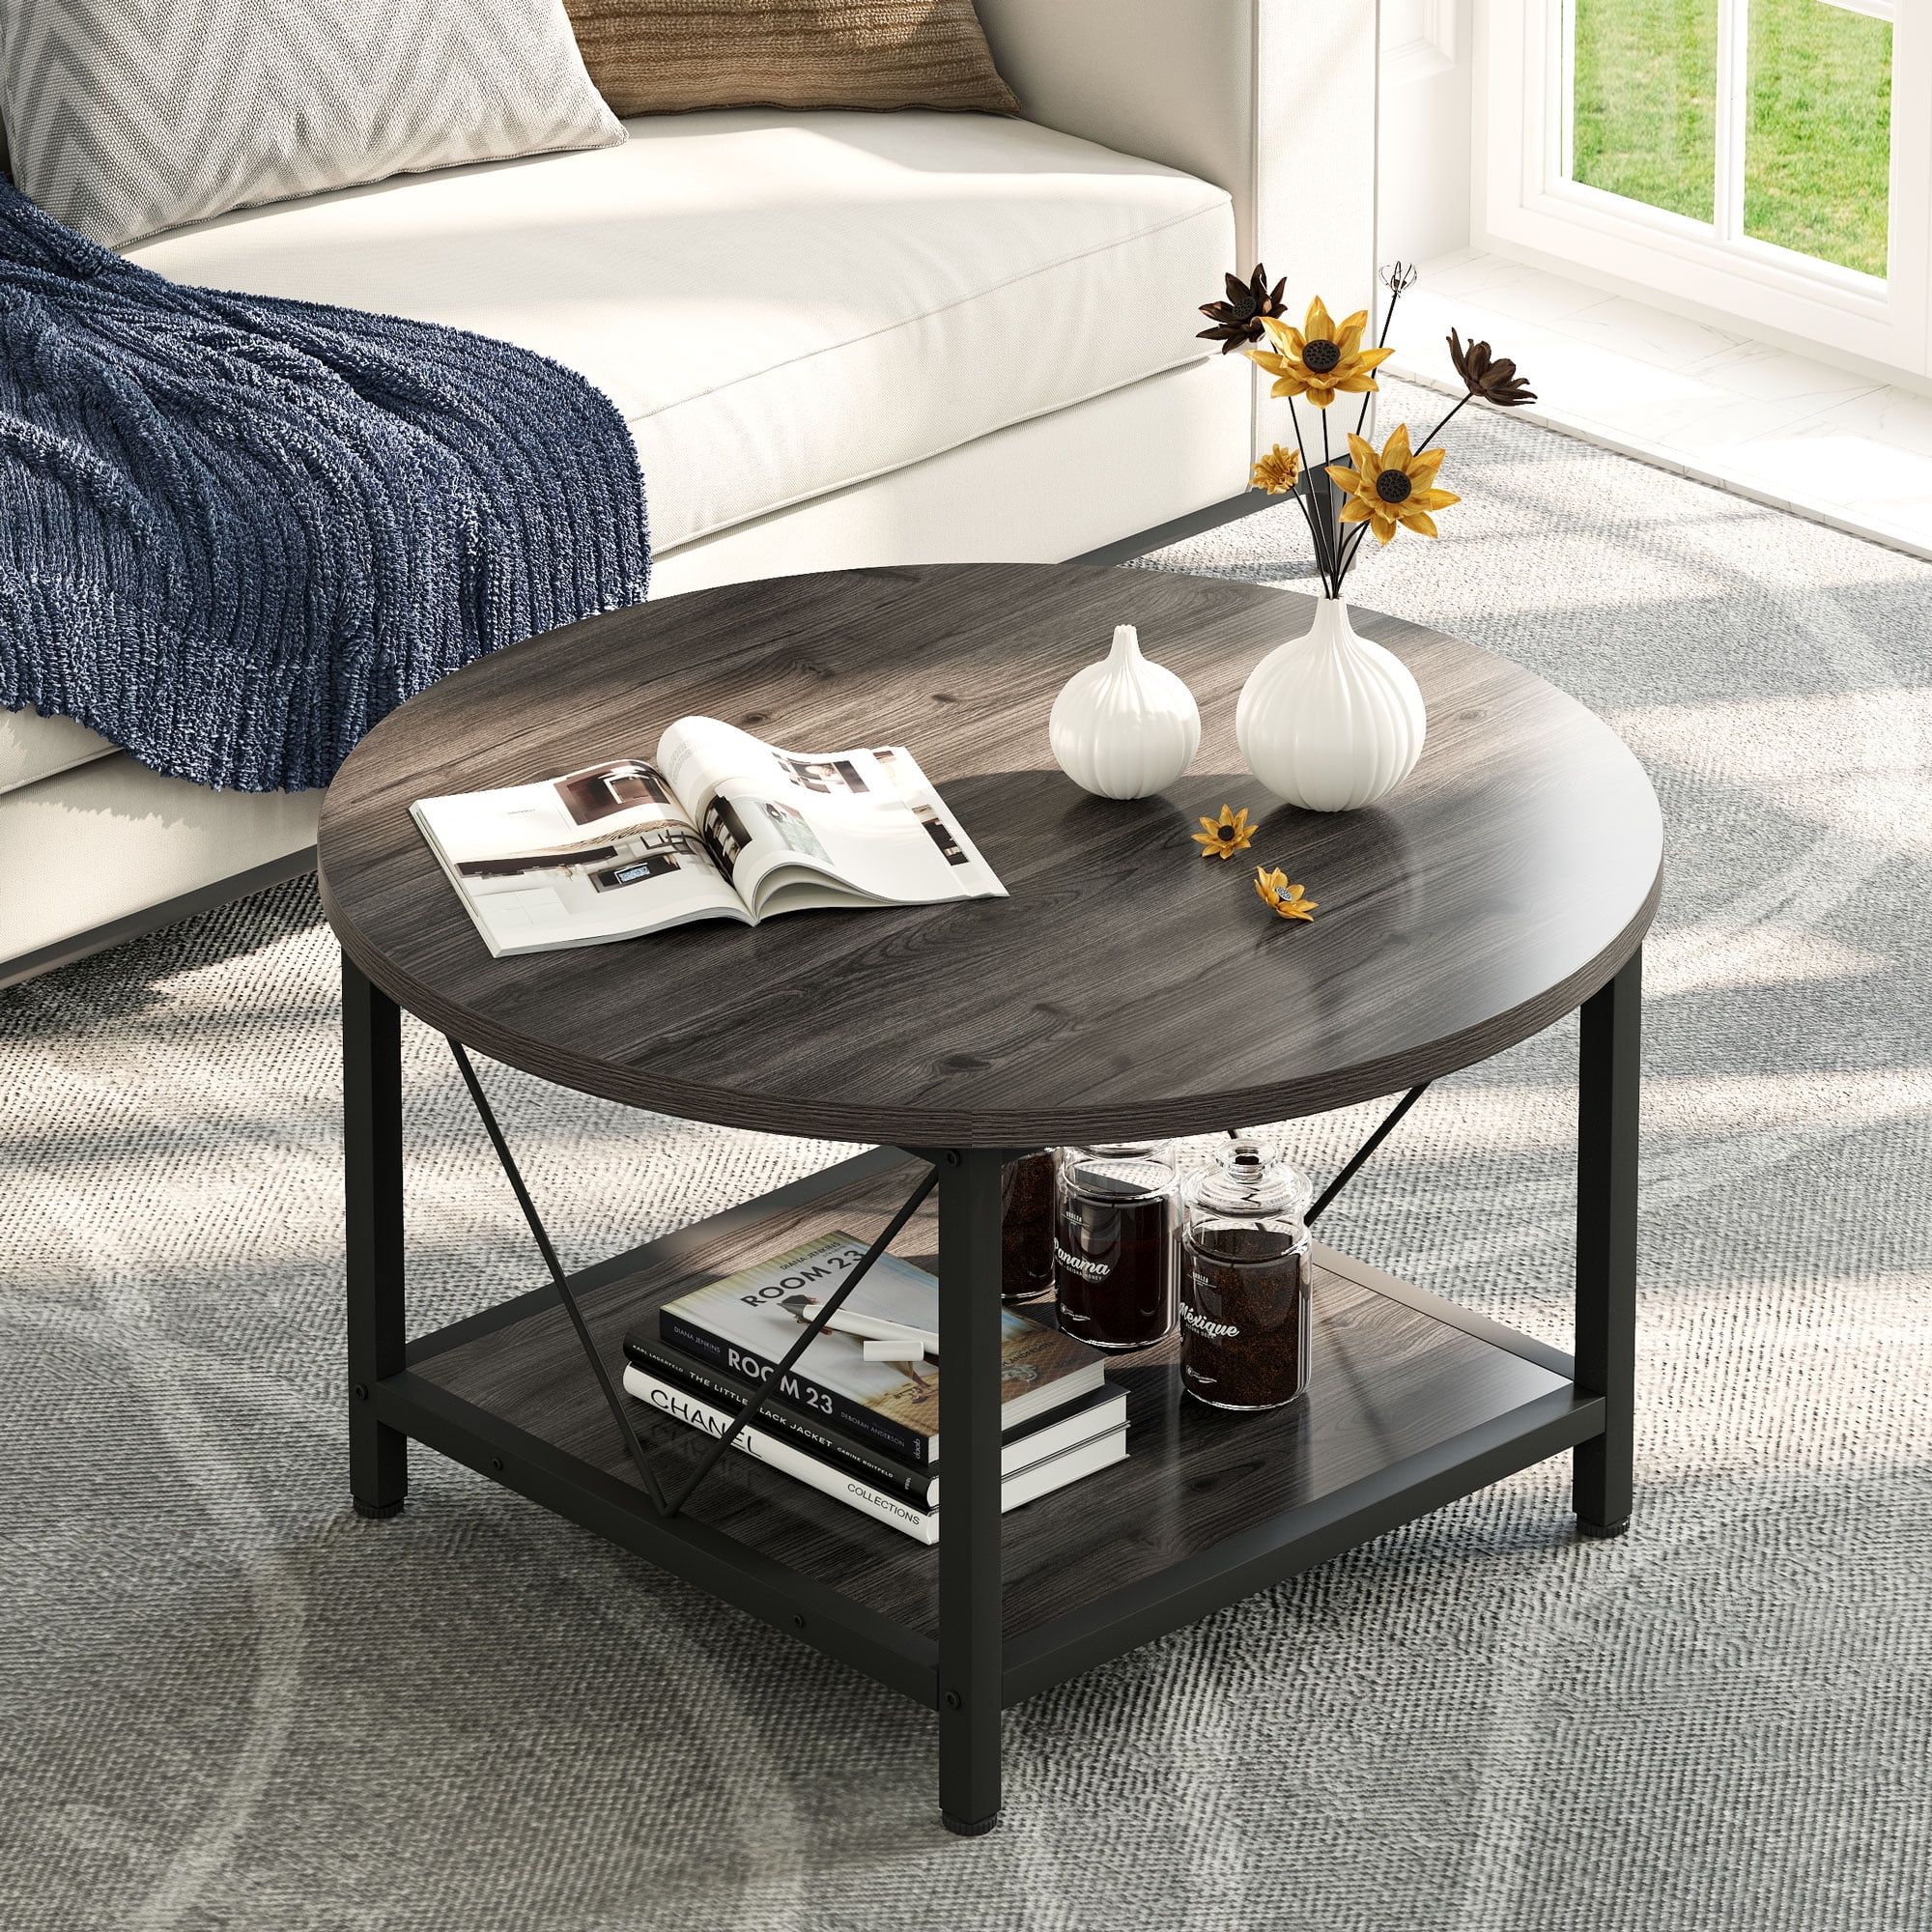 Dextrus Round Coffee Table With Storage, Rustic Living Room Tables With  Sturdy Metal Legs, Brown – Walmart Intended For Round Coffee Tables With Storage (View 9 of 15)